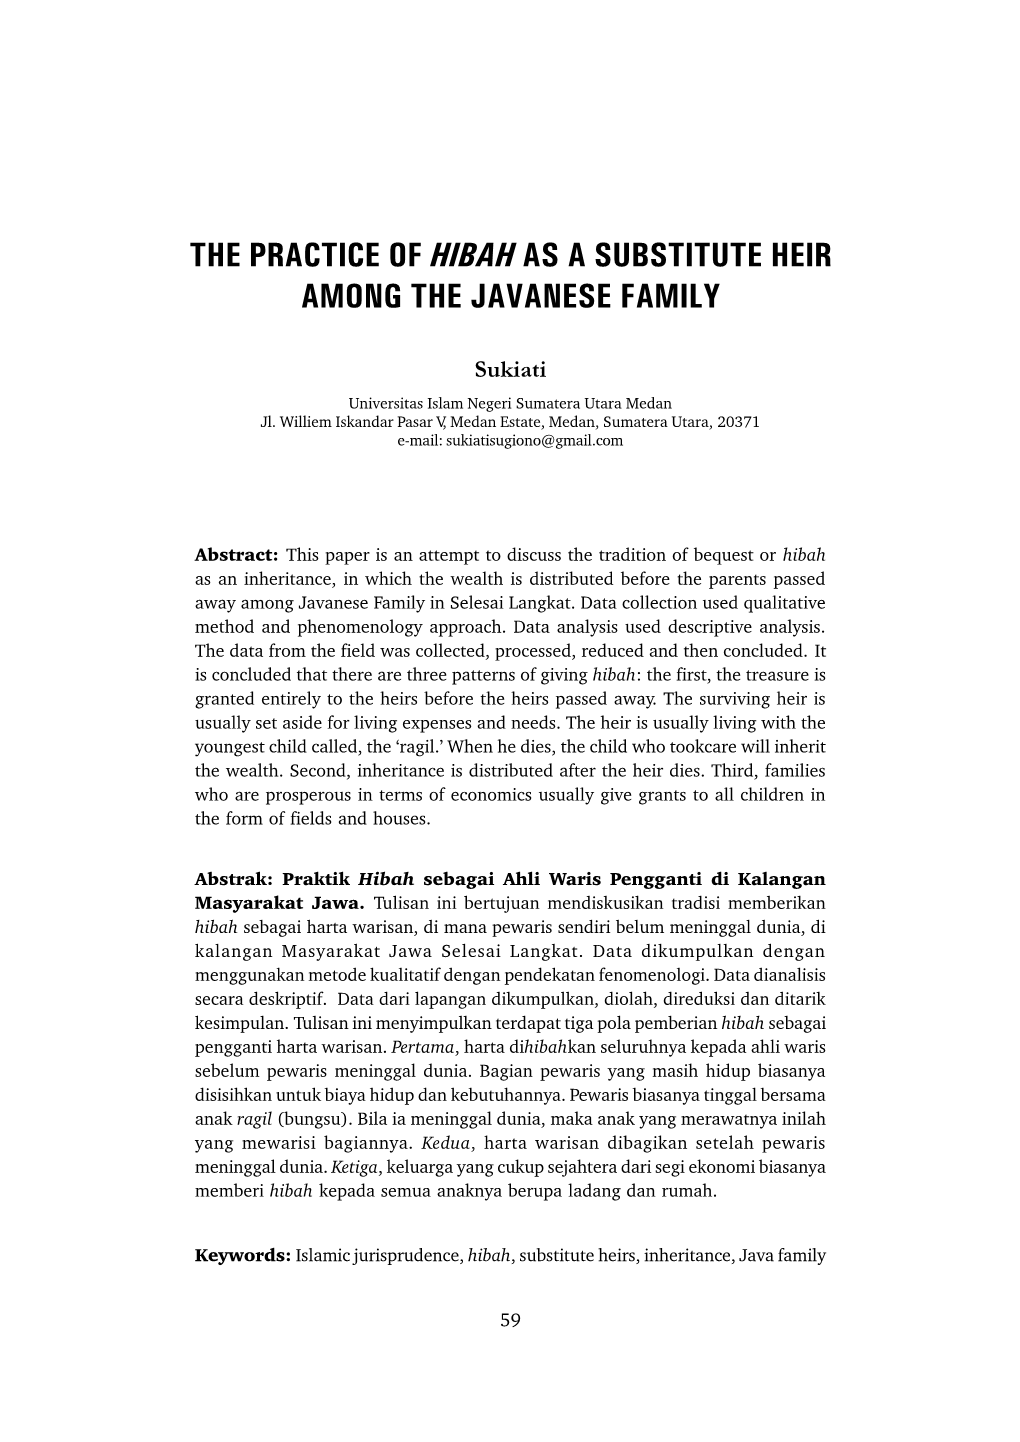 The Practice of Hibah As a Substitute Heir Among the Javanese Family